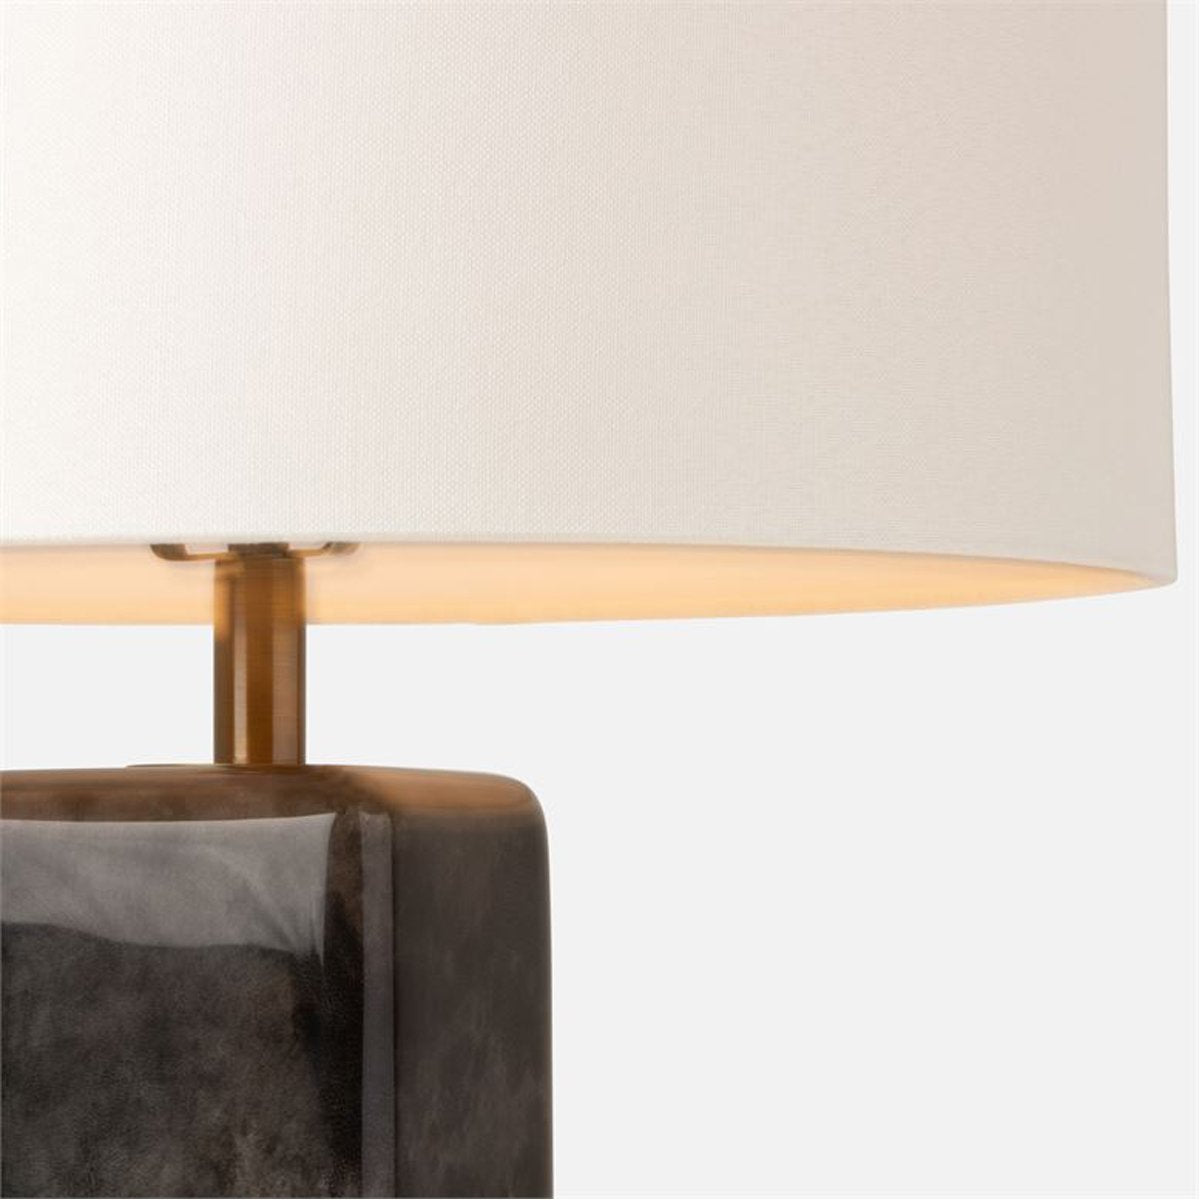 Made Goods Ripley Vellum Leather Table Lamp